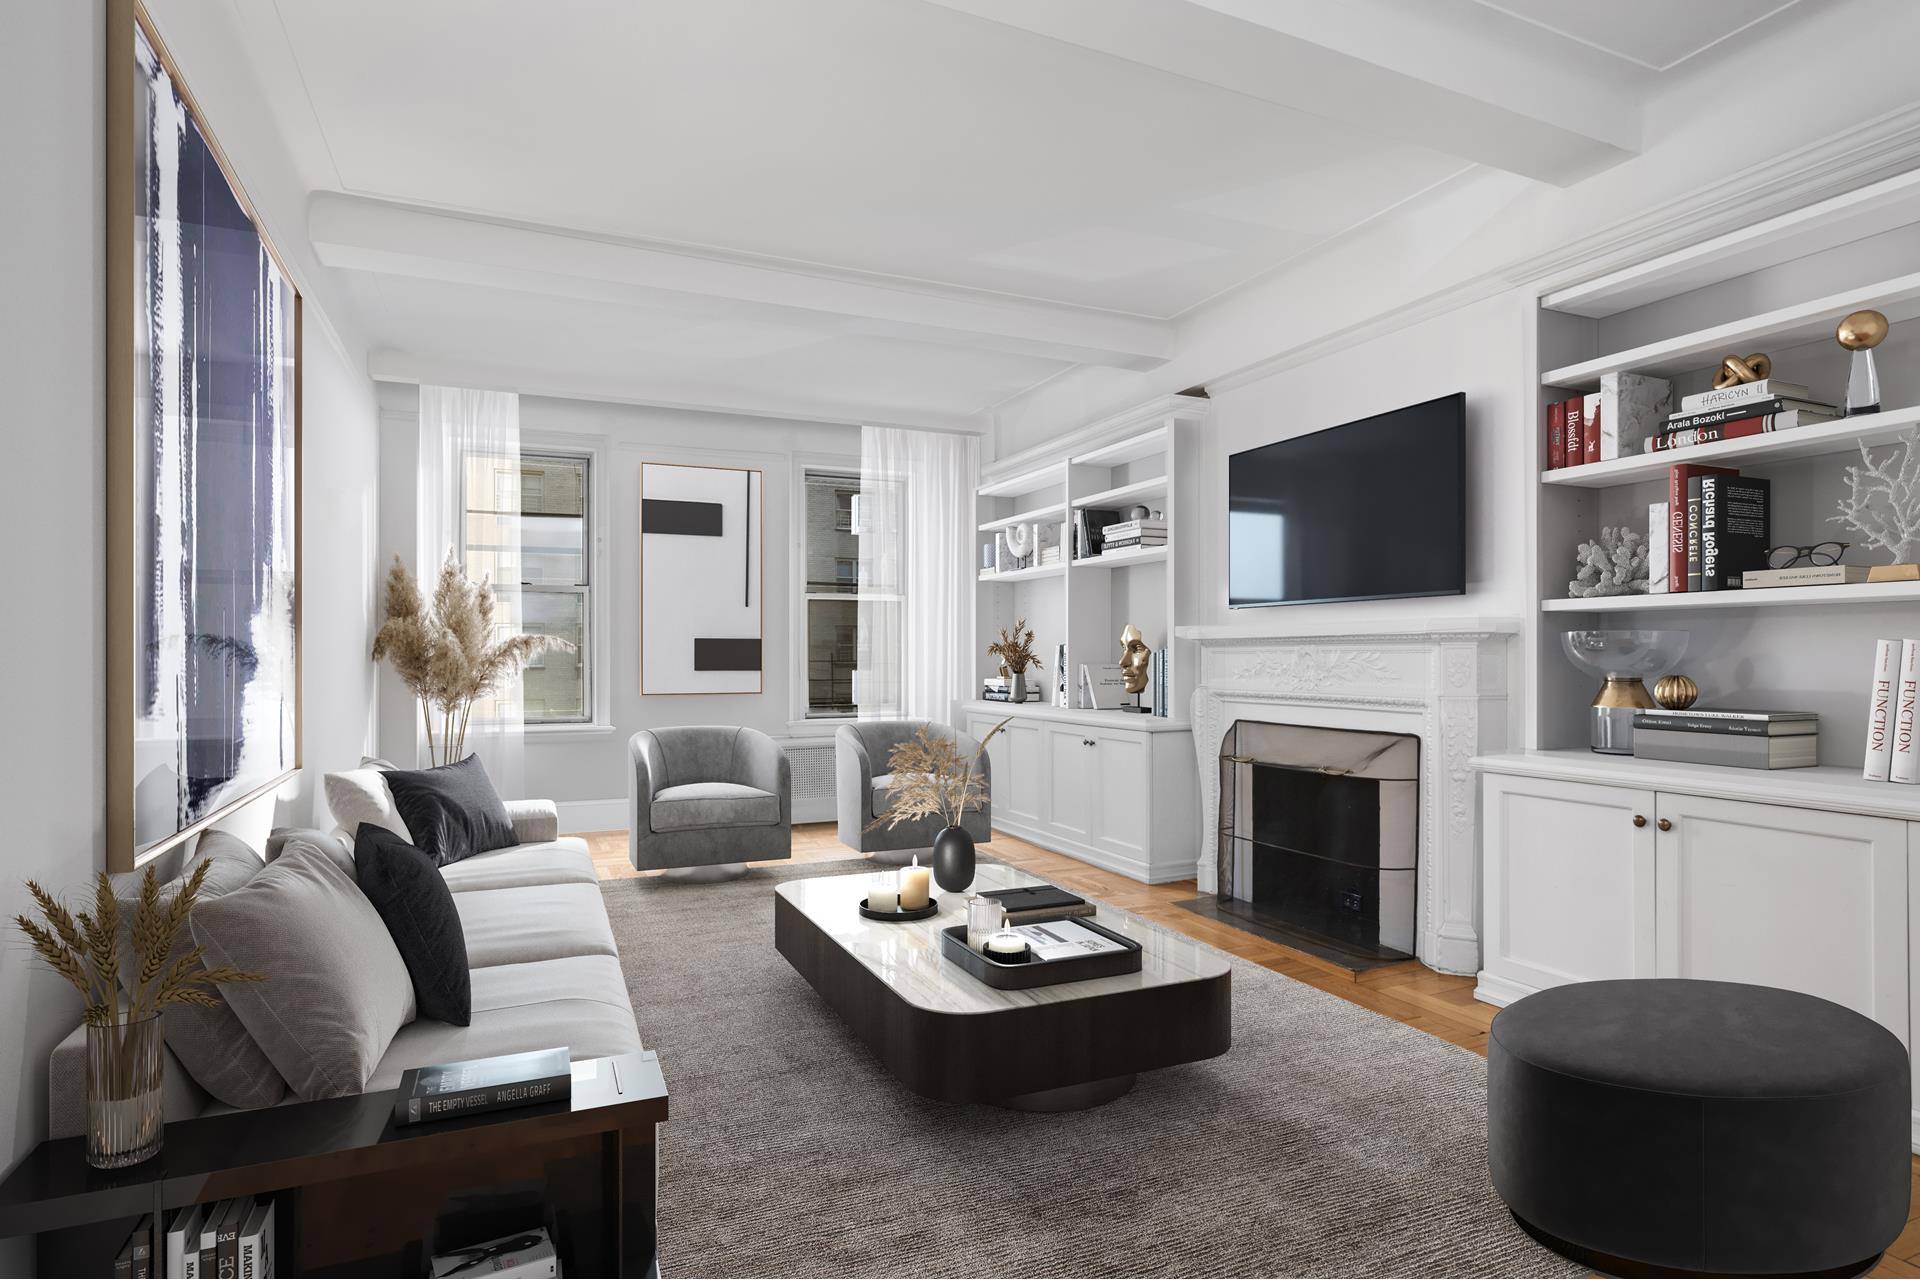 Rare opportunity to rent a 3 Bedroom on Park Ave in a highly sought after Prewar Condominium in the renowned Carnegie Hill.